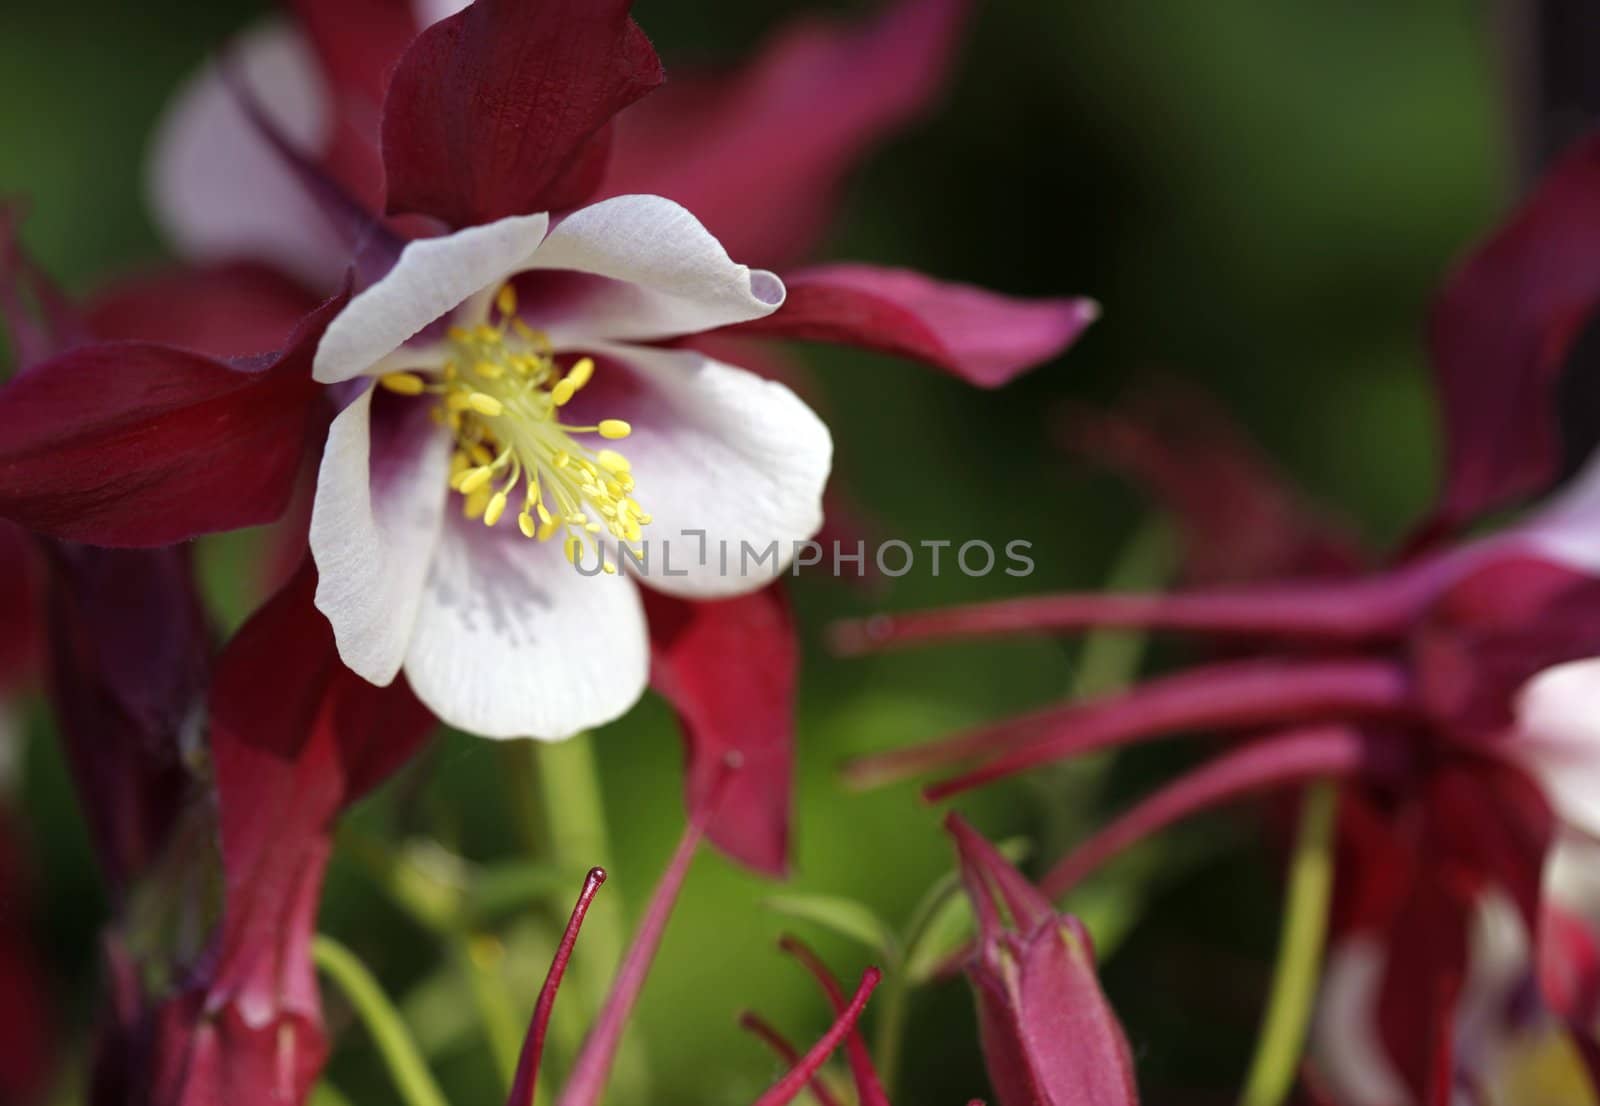 Red Columbine by Auldwhispers